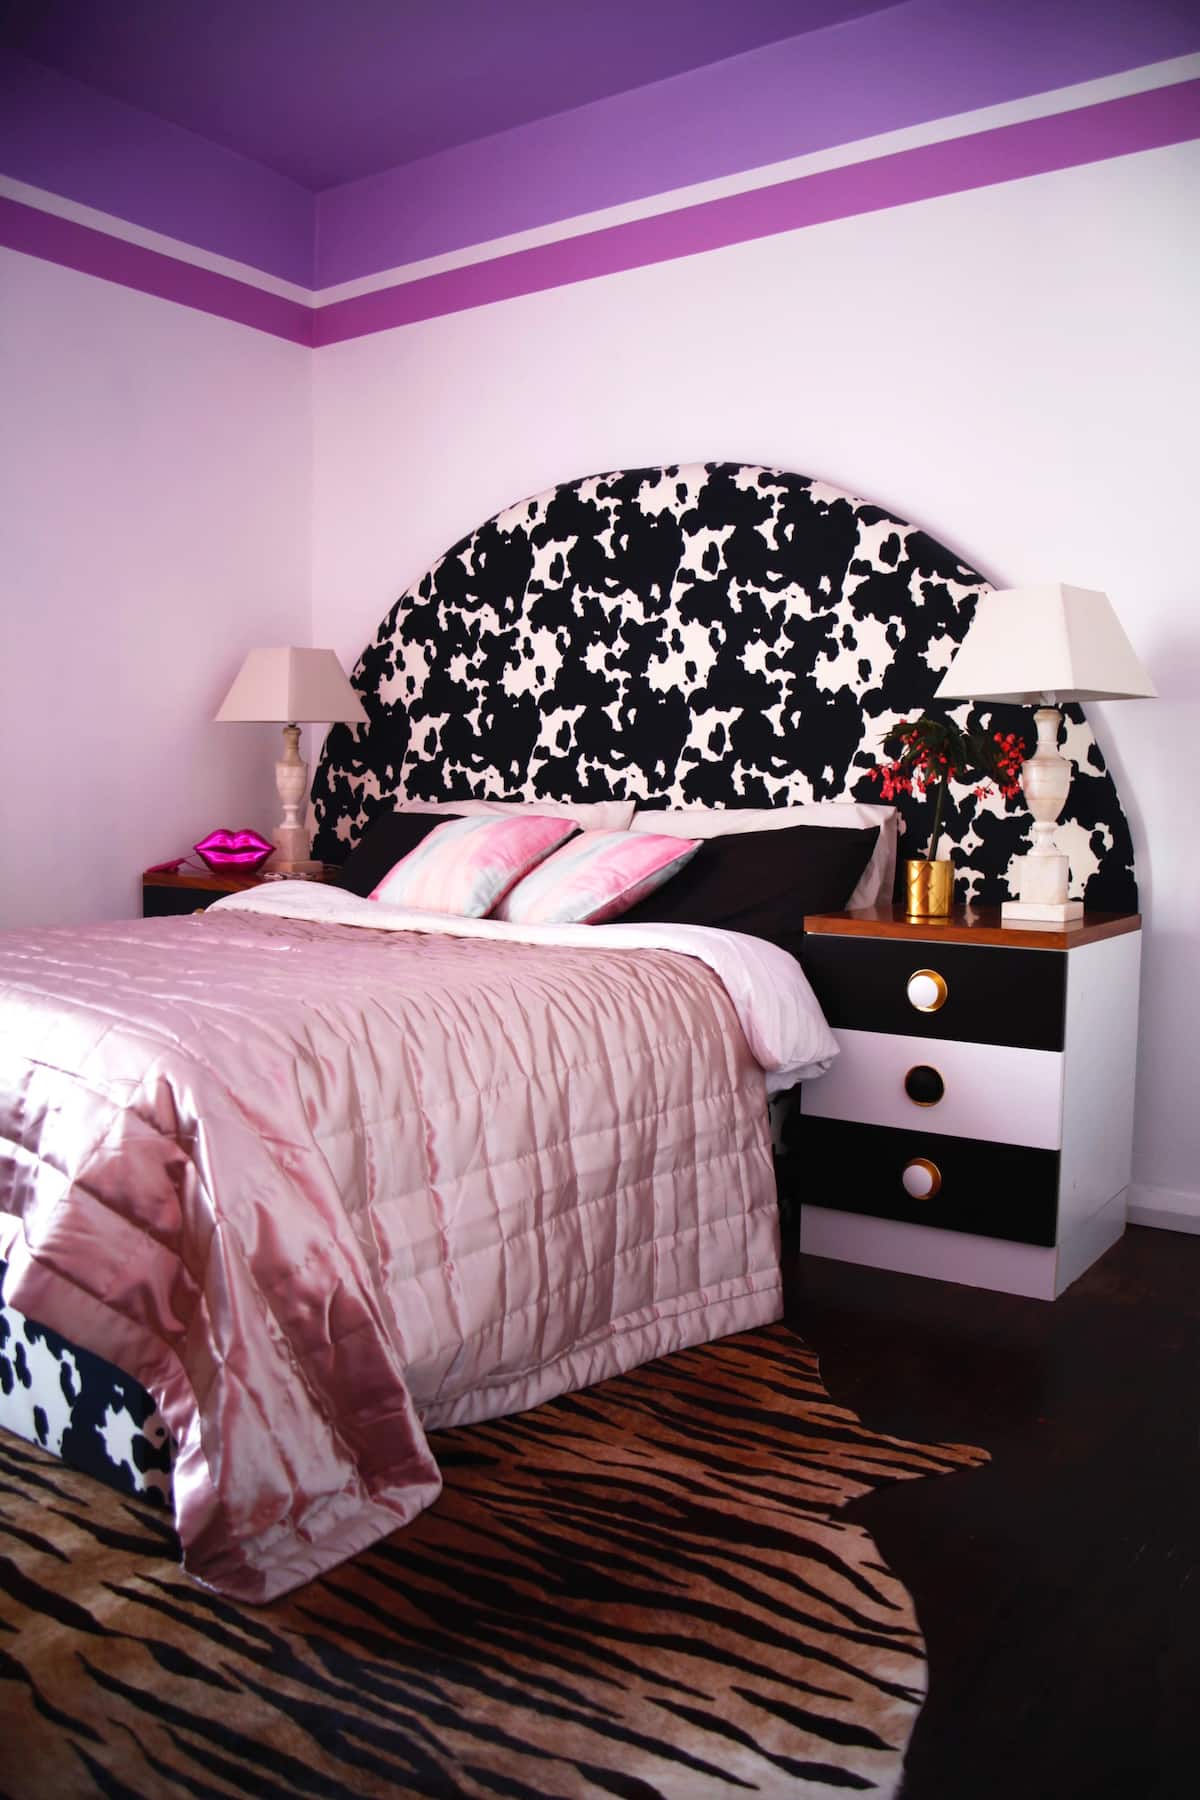 80s-Themed Rooms: 10 Ways to Get the Look | Hunker